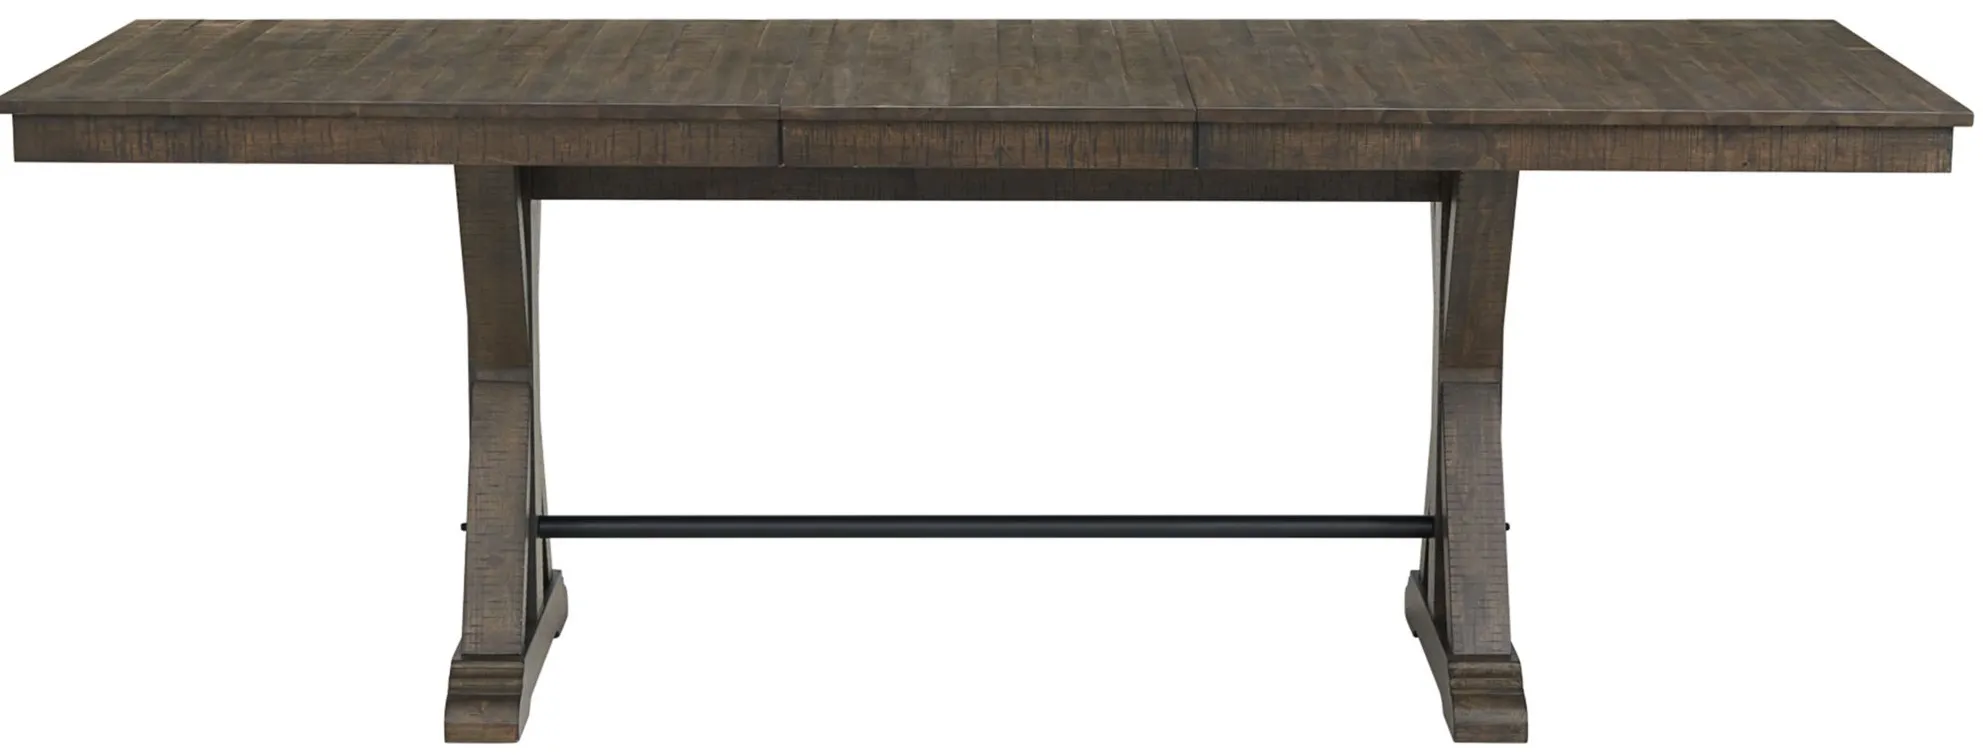 Sullivan Gathering Table in Brushed Charcoal by Intercon